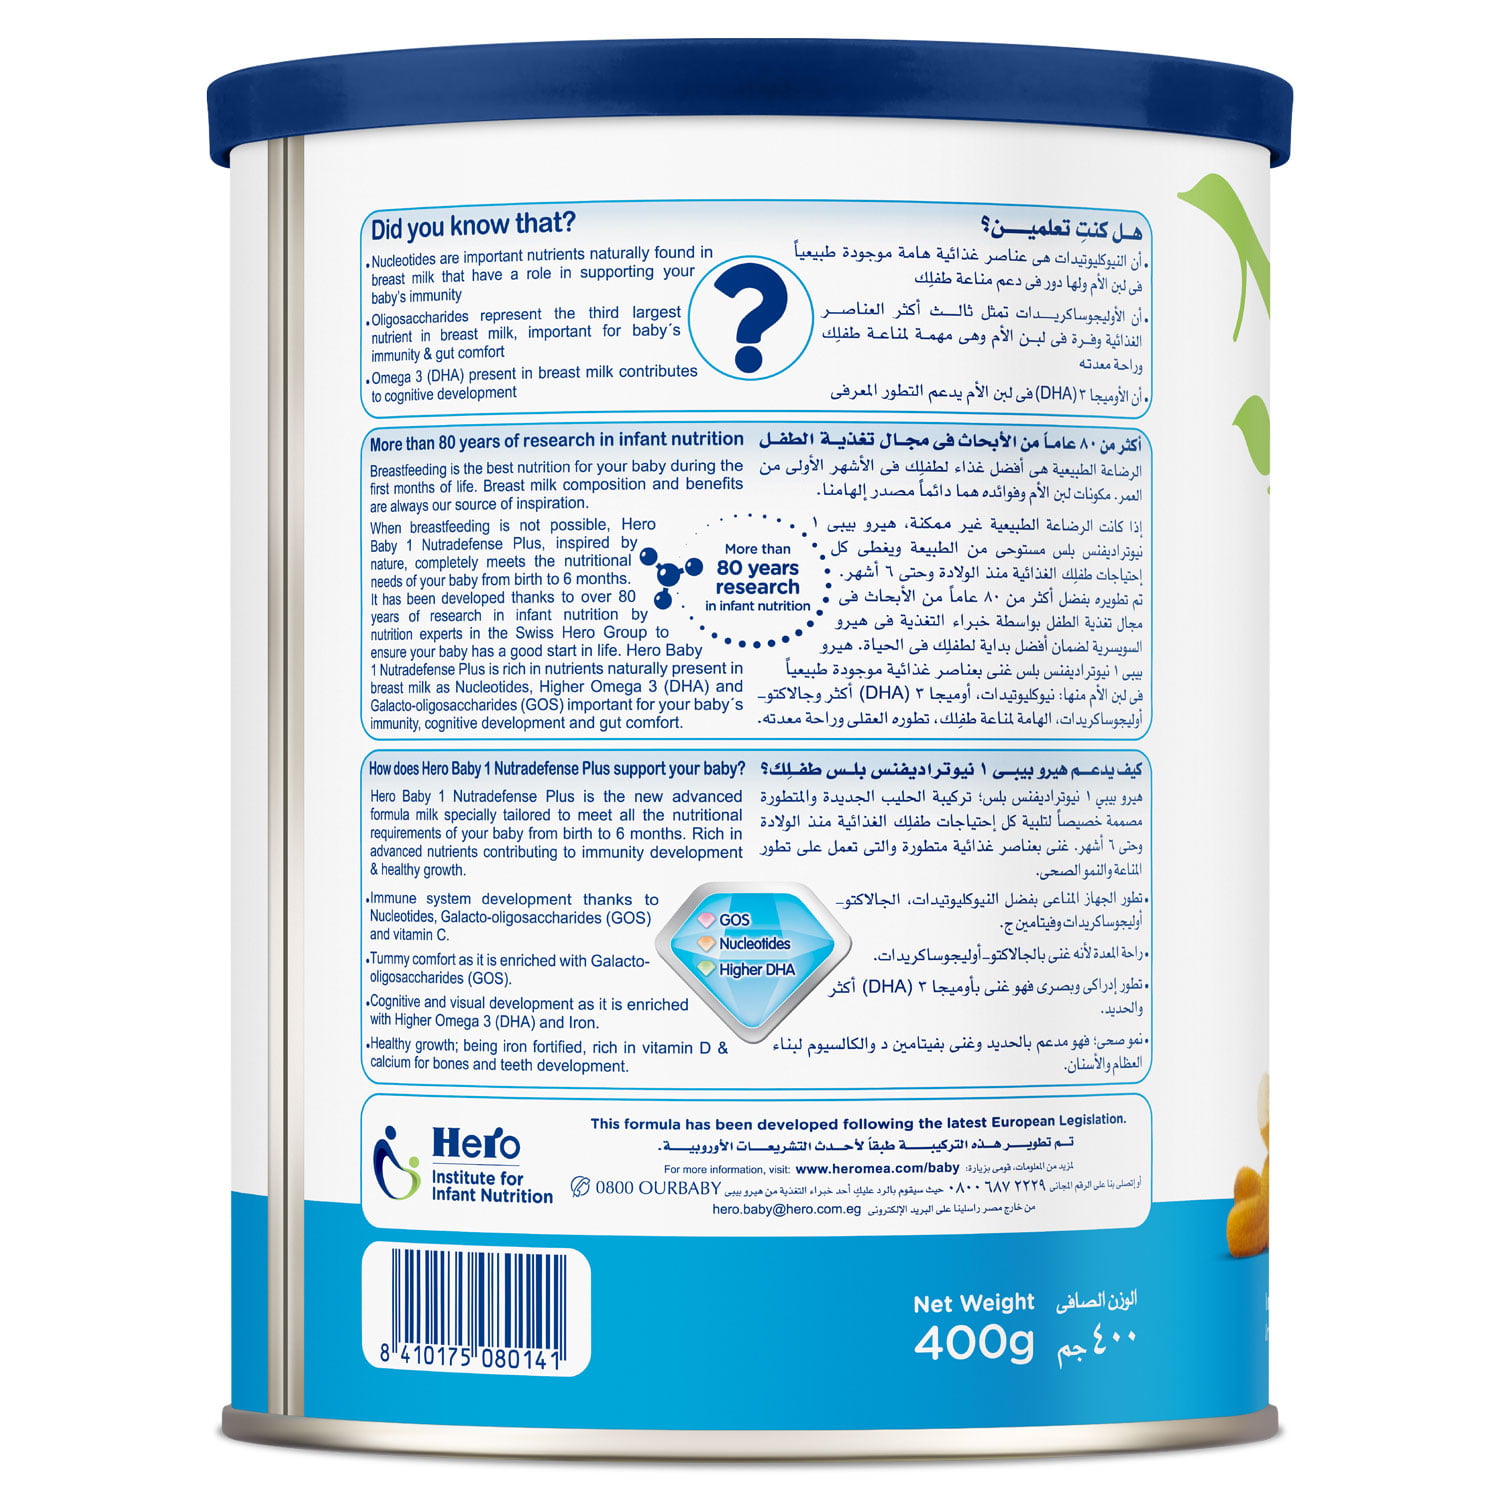 Hero Baby Digest Formula Milk - From Birth to 12 Months, 400 gm price in  Egypt,  Egypt